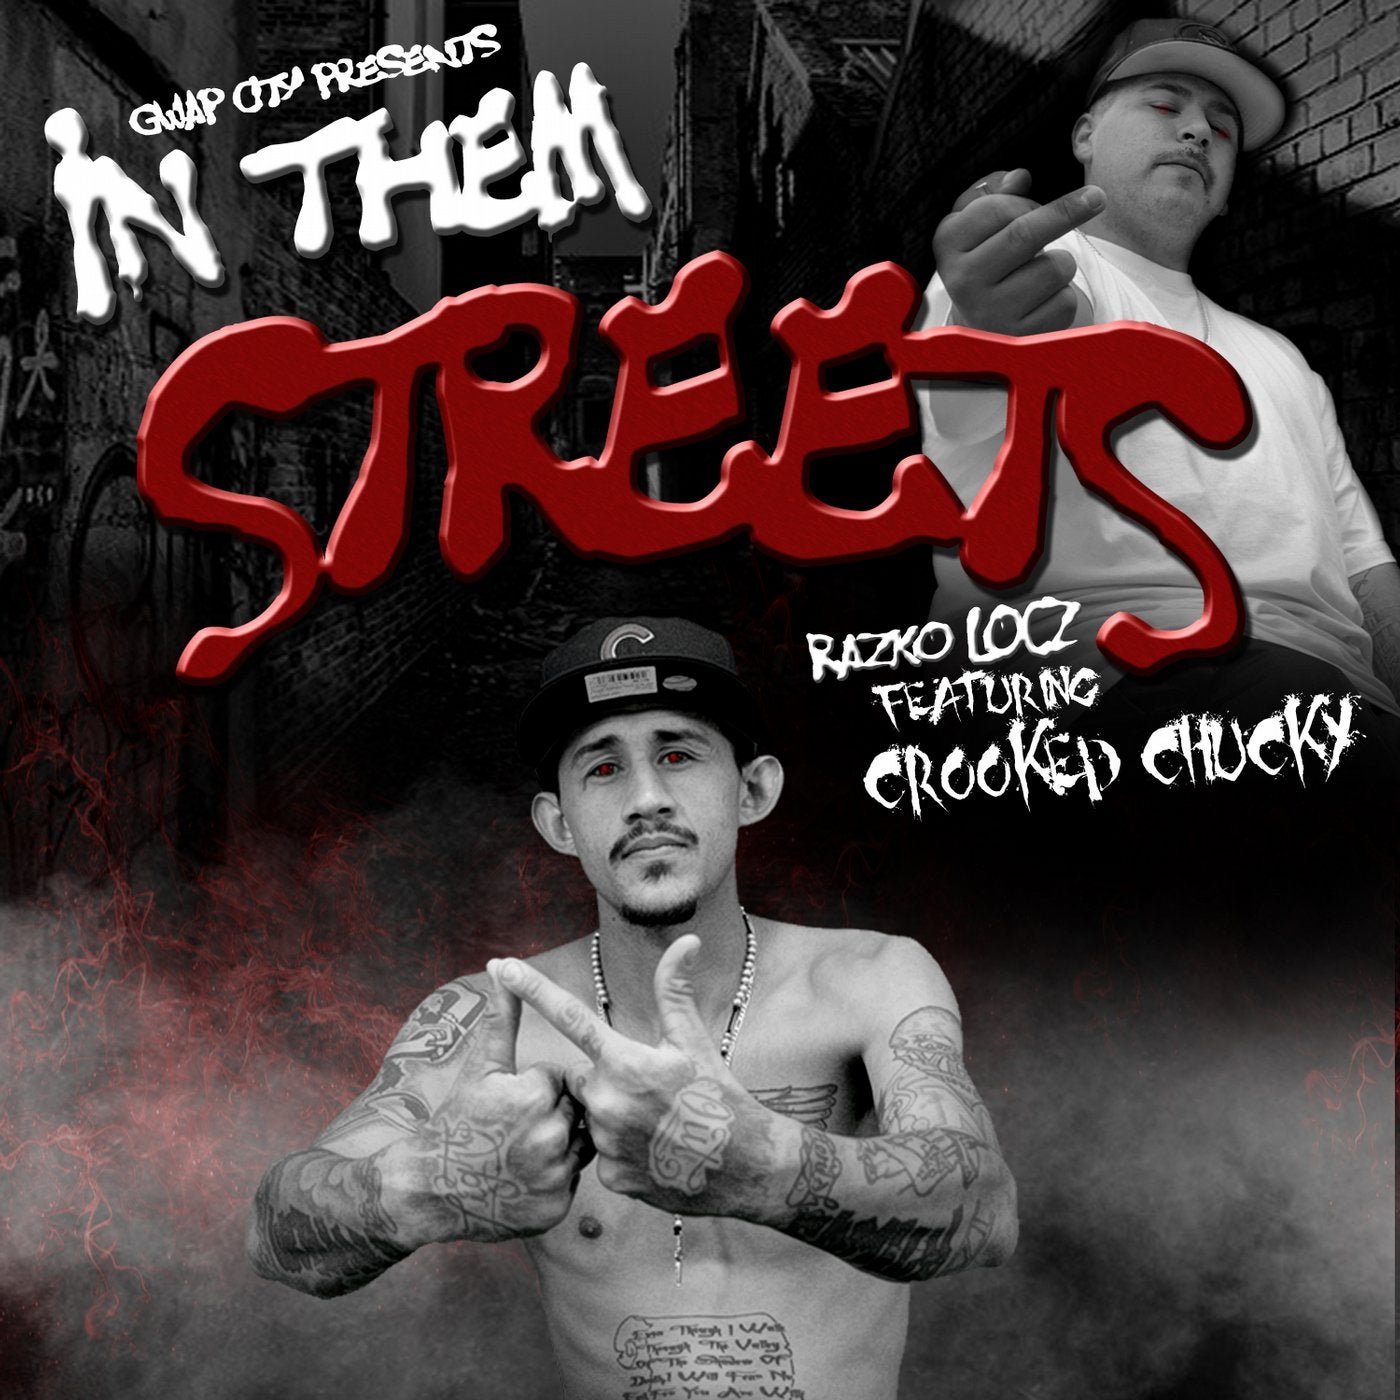 In Them Streets (feat. Crooked Chucky)